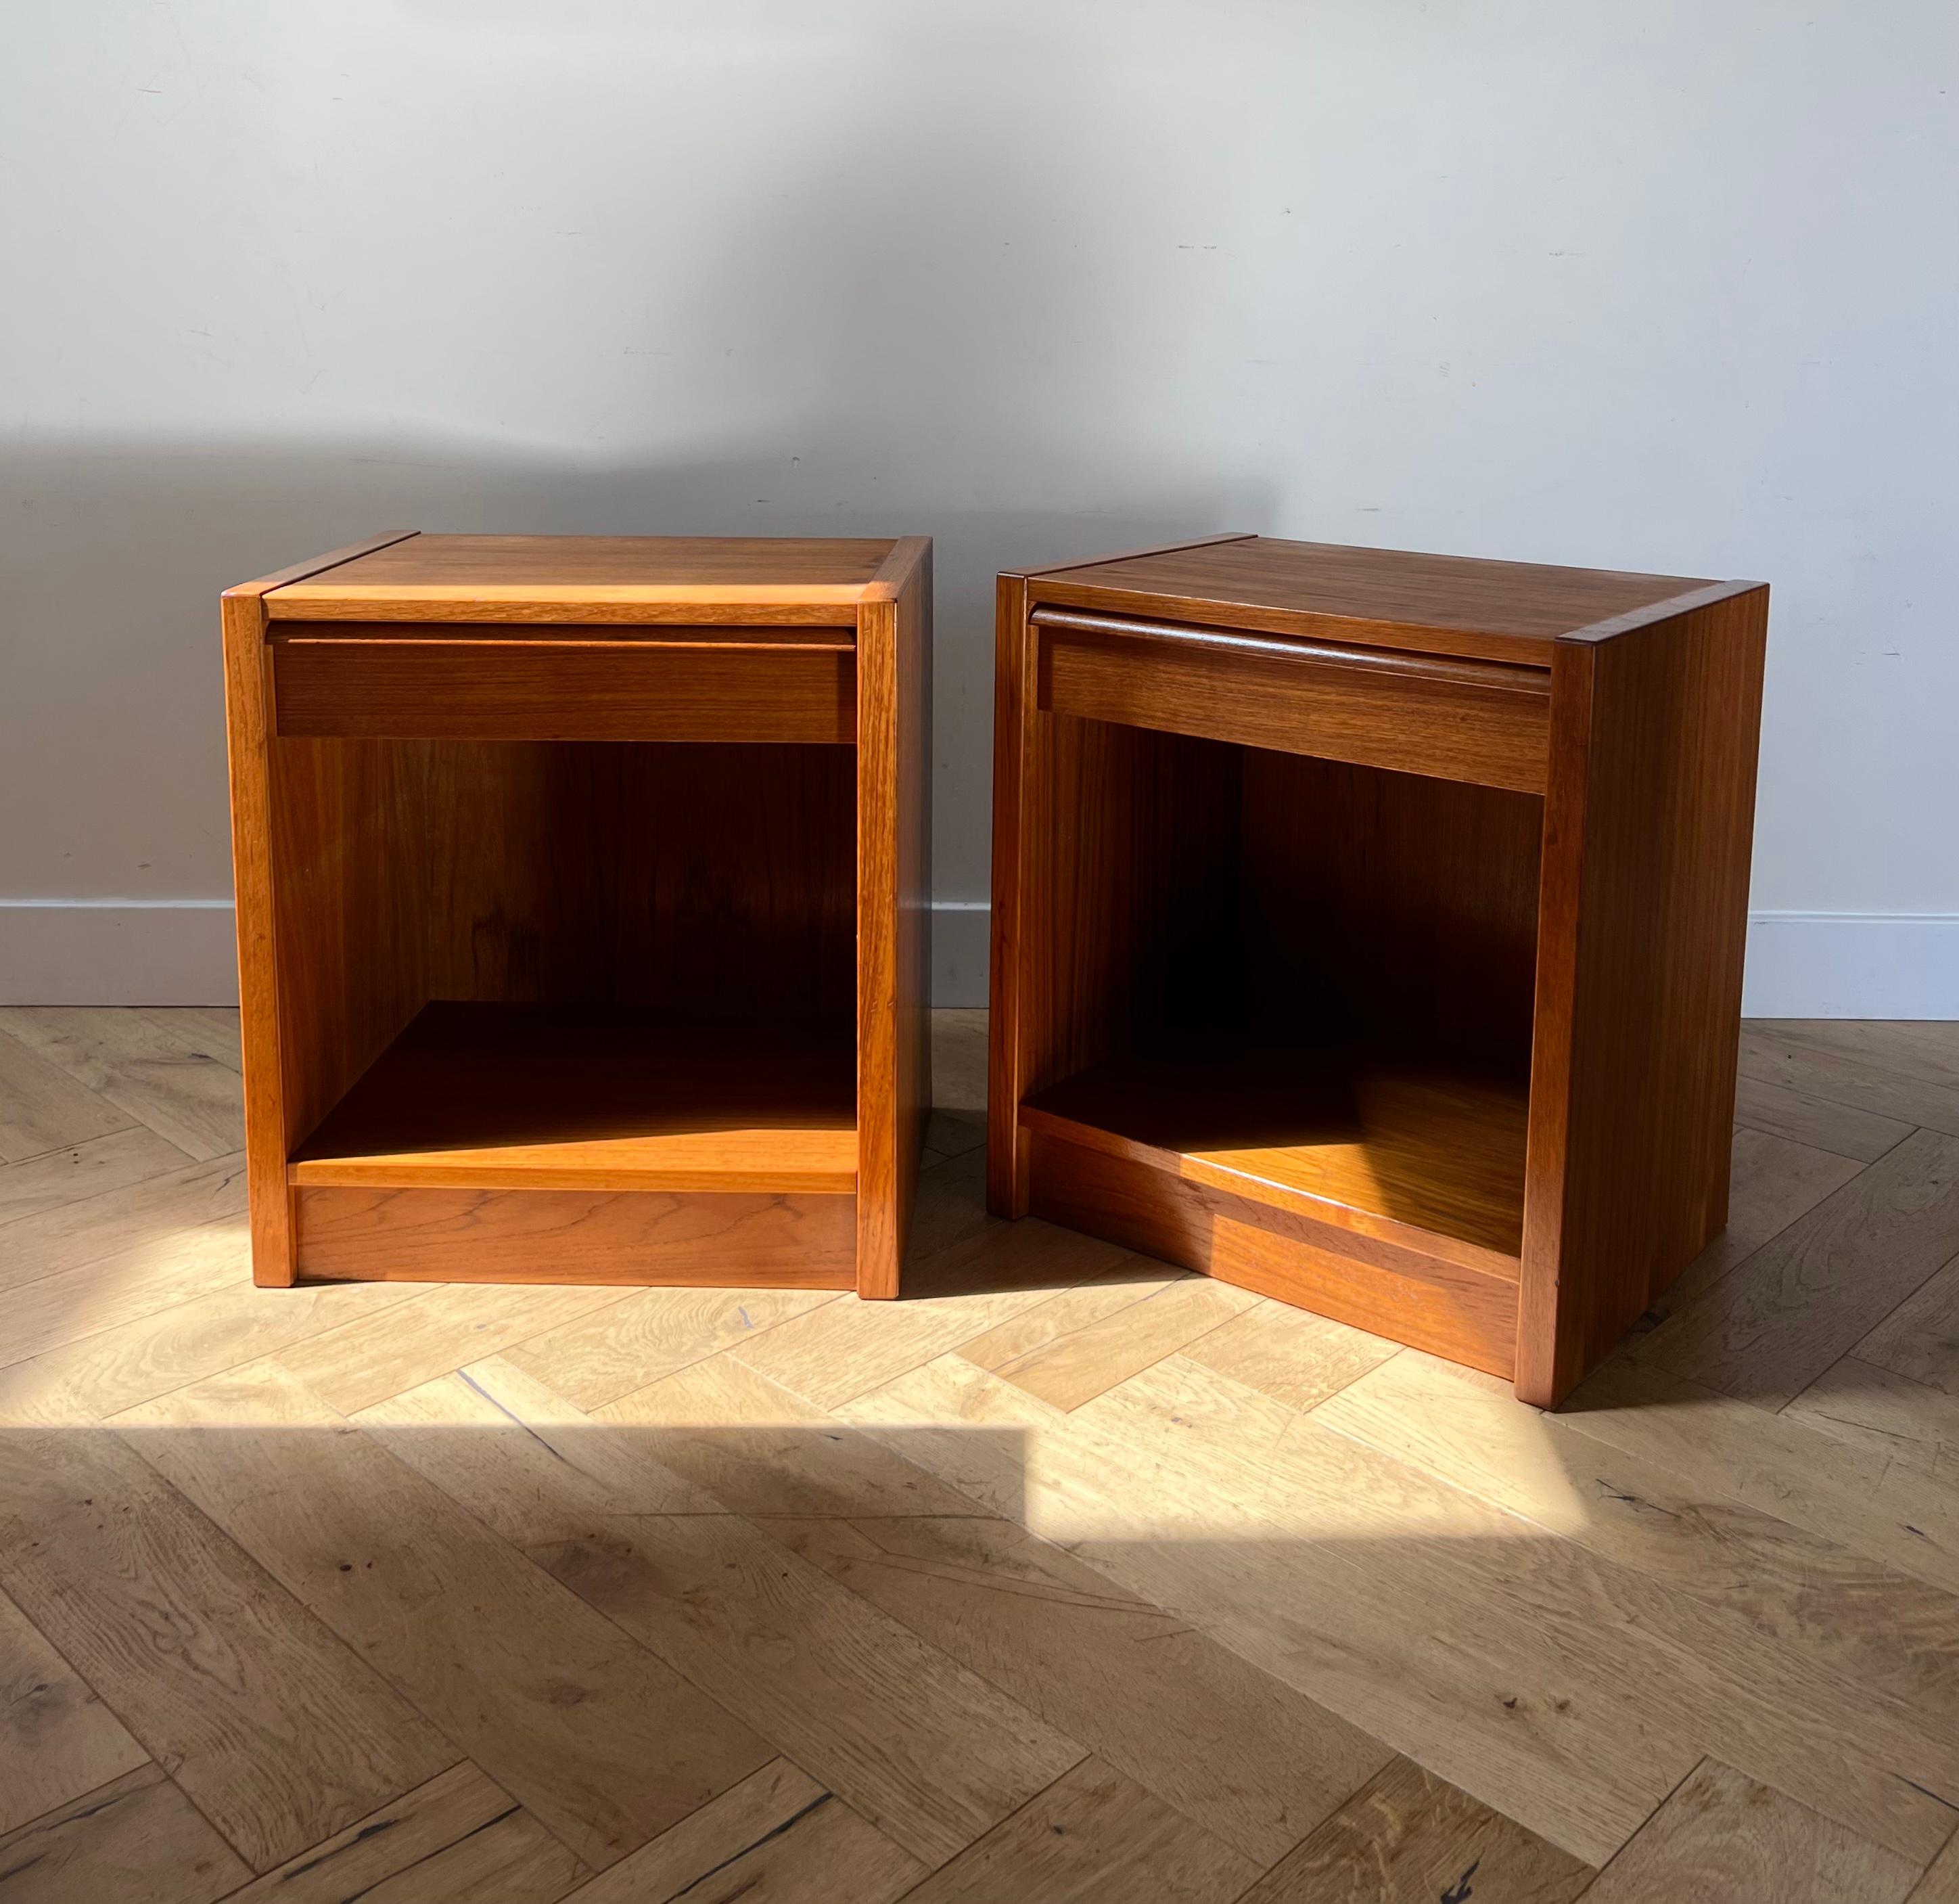 A park of Danish mid century nightstands in teak by Jesper, circa early 1960s. Made in Denmark. Each with original maker’s label on verso. Each with a drawer that pulls out. Minimal signs of wear consistent with age but no glaring flaws. Pick up in